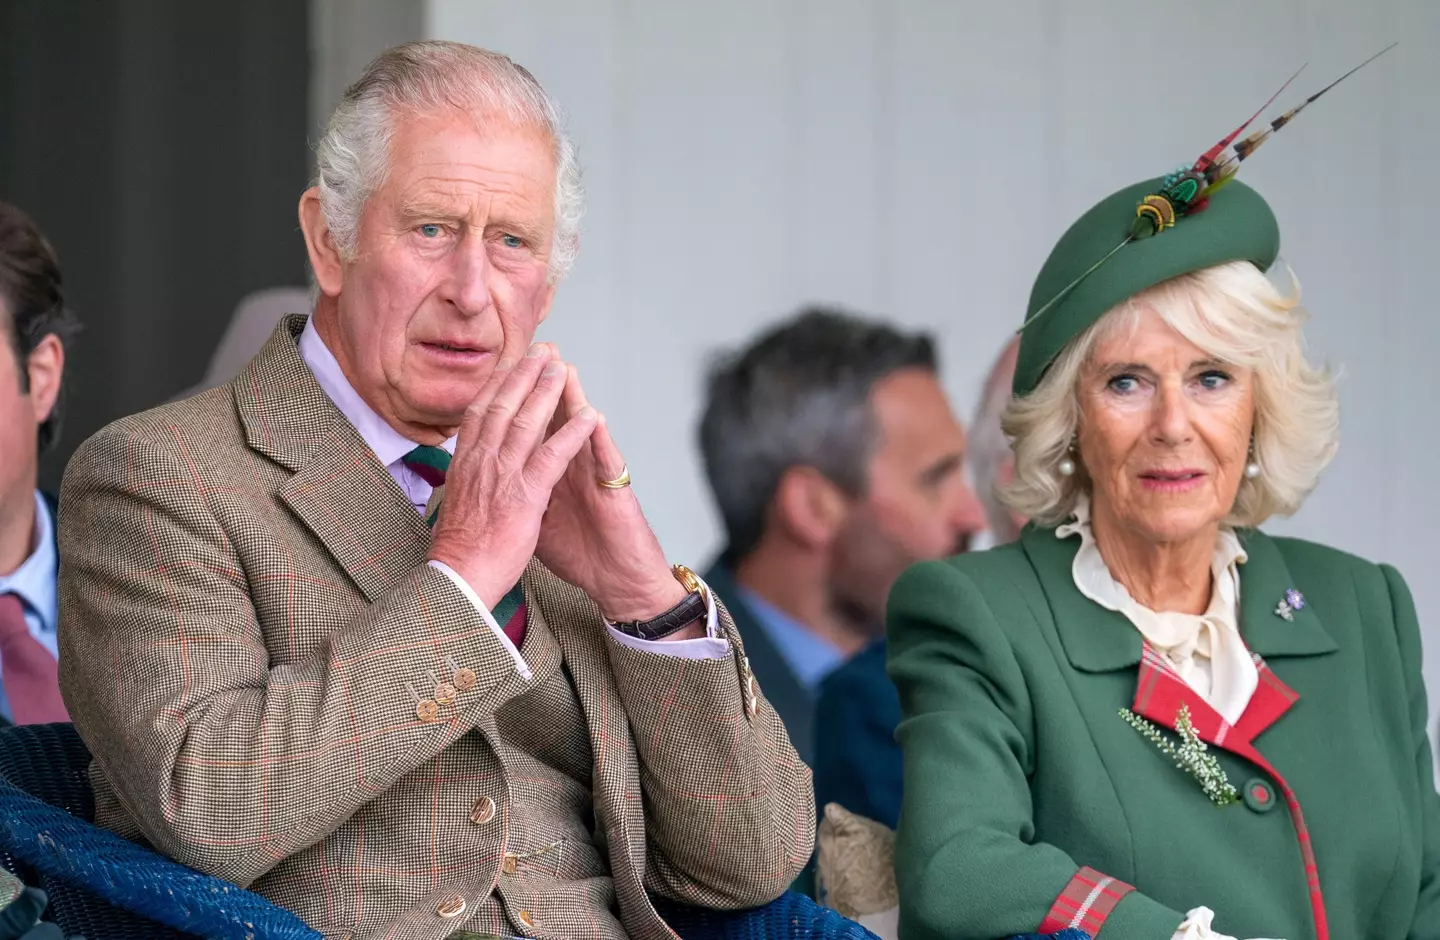 Camilla, the Duchess of Cornwall, will be known as Queen Consort.